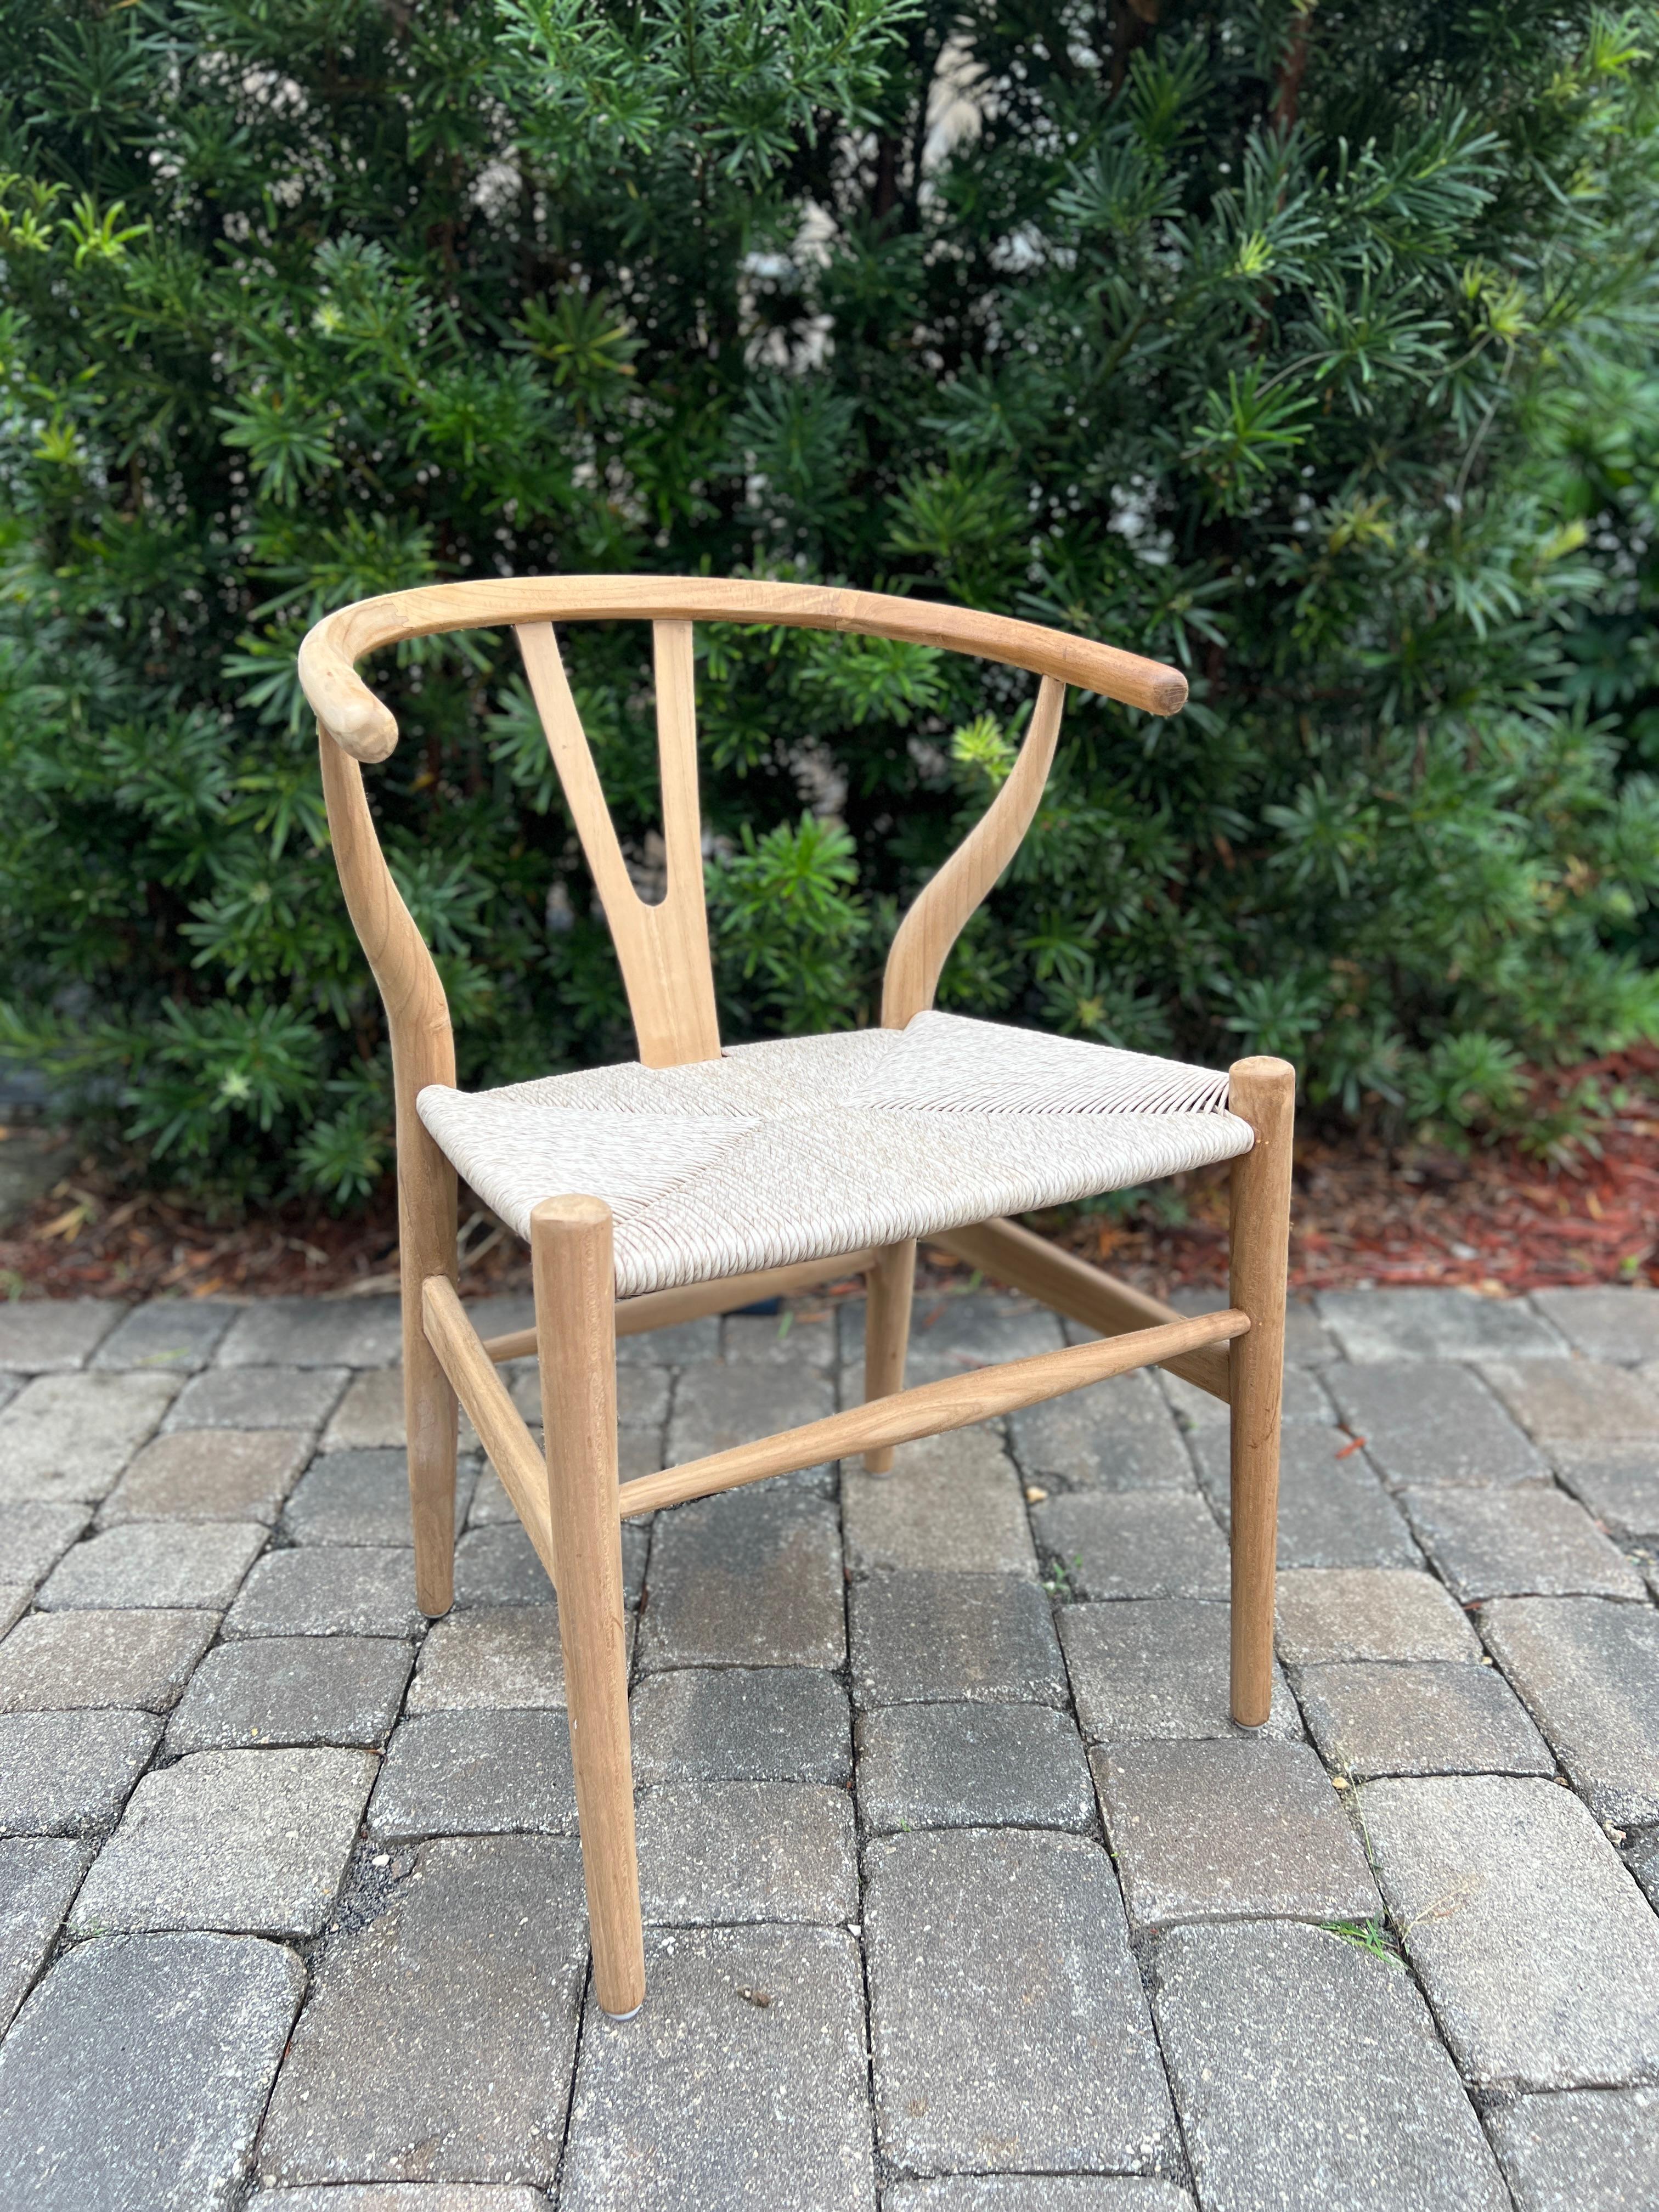 Hand-Crafted Mid-Century Modern Chair in Natural Teak Wood with Handwoven Seat, Denmark